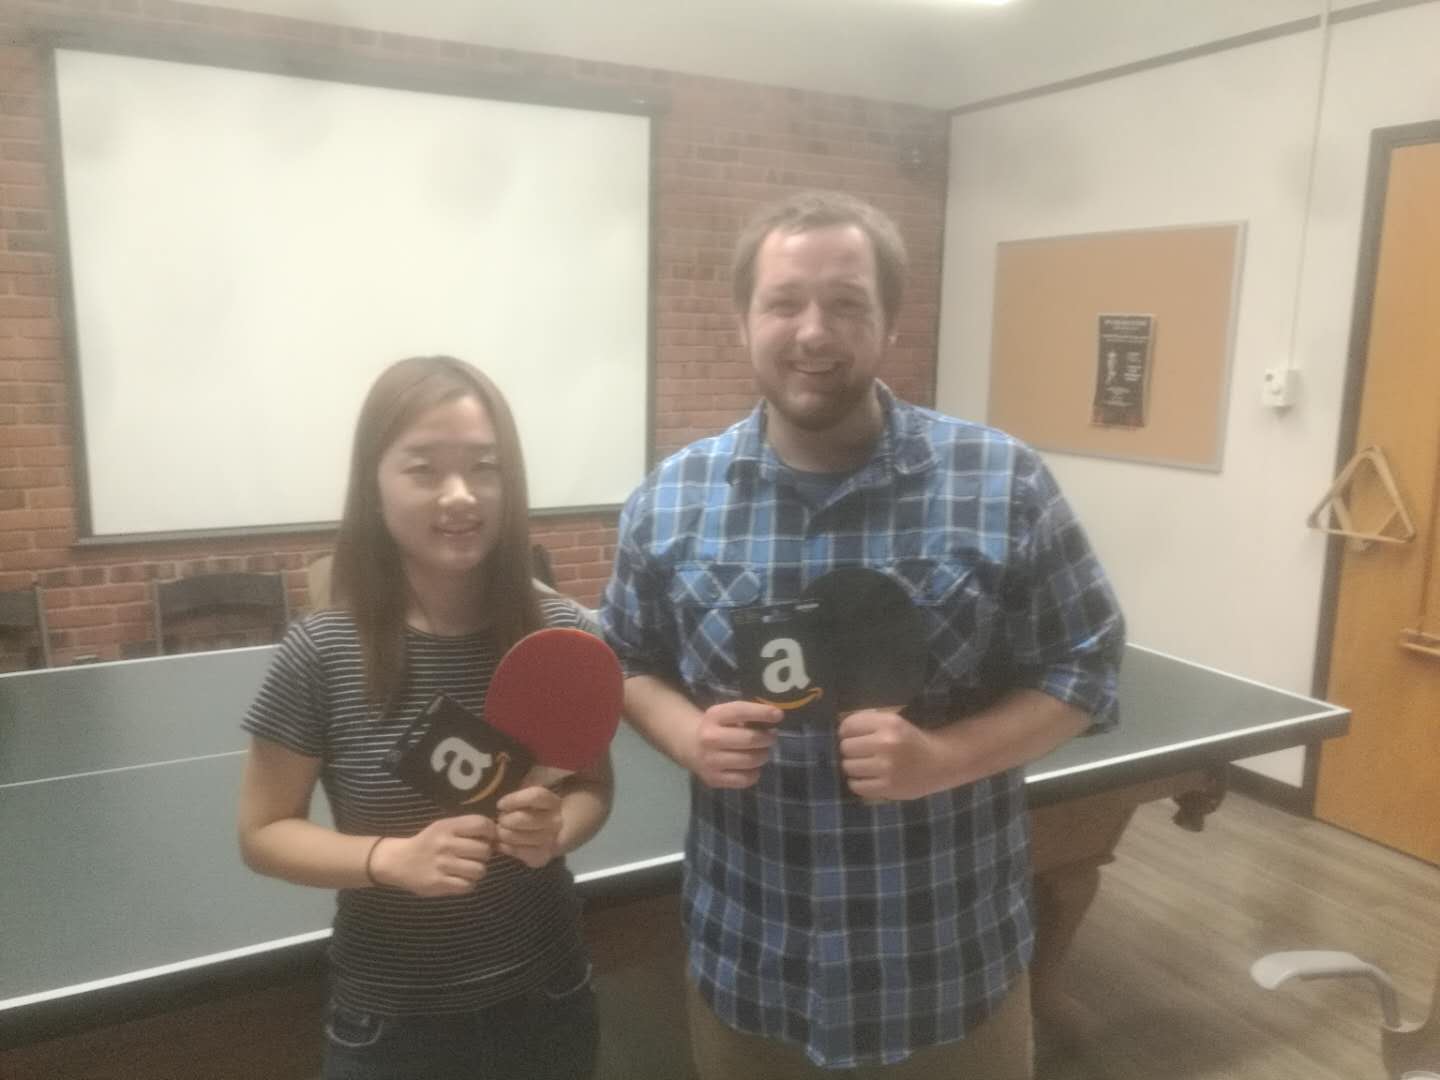 A woman and a man with ping pong paddles and Amazon gift cards